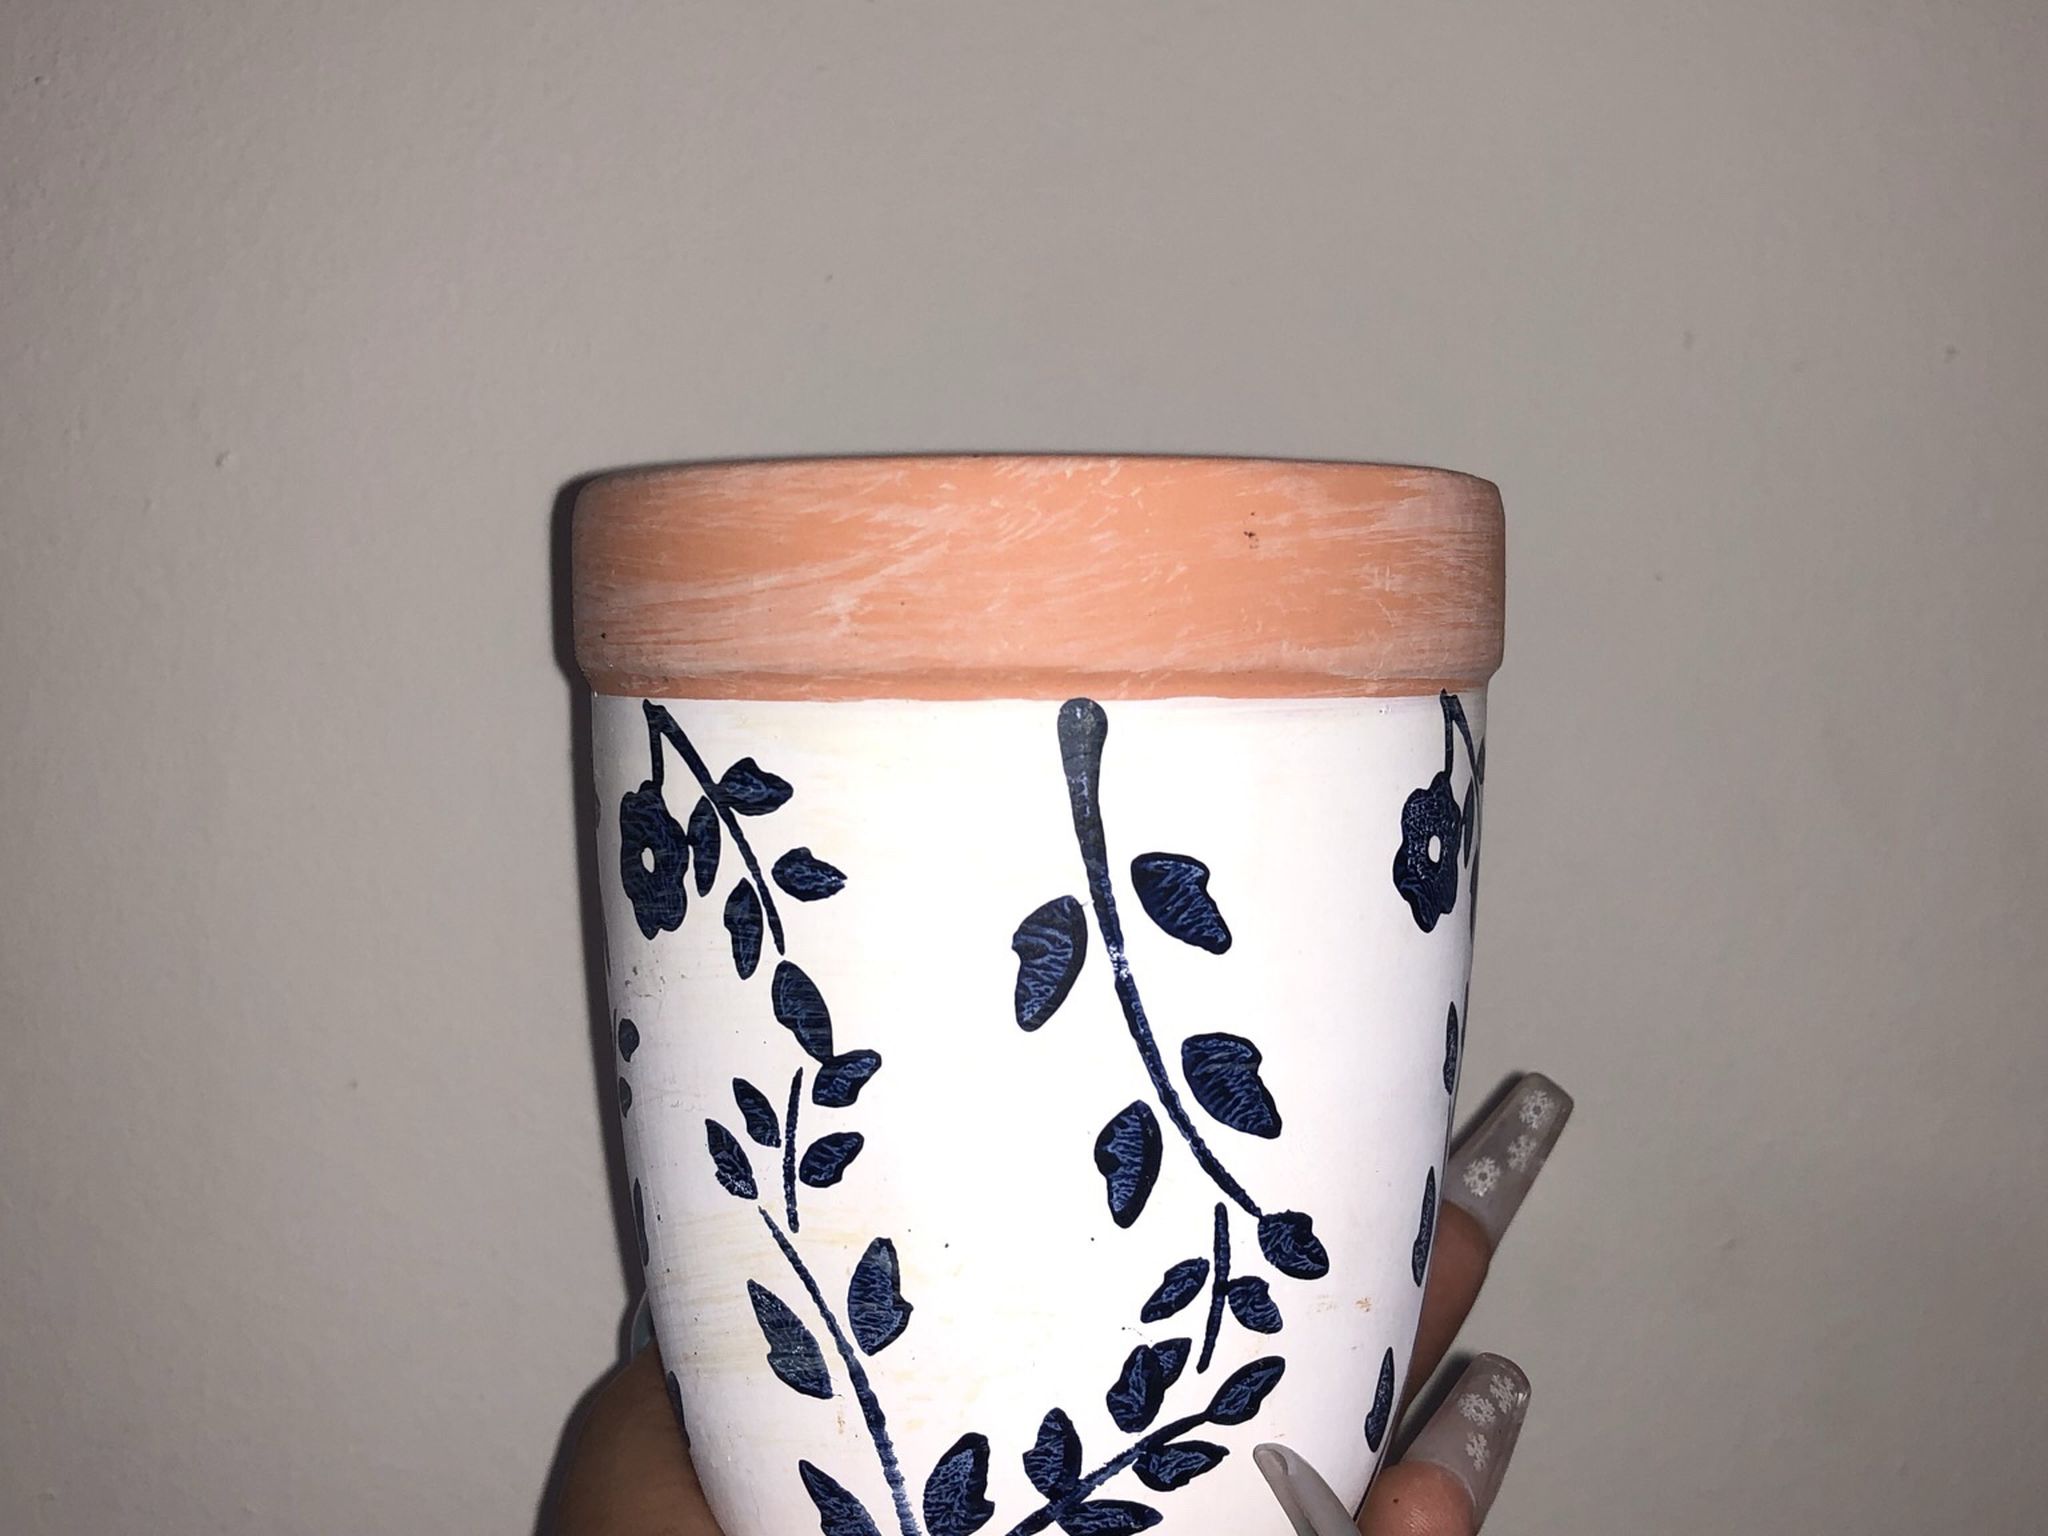 Terra Cotta Floral Pot With Drainage